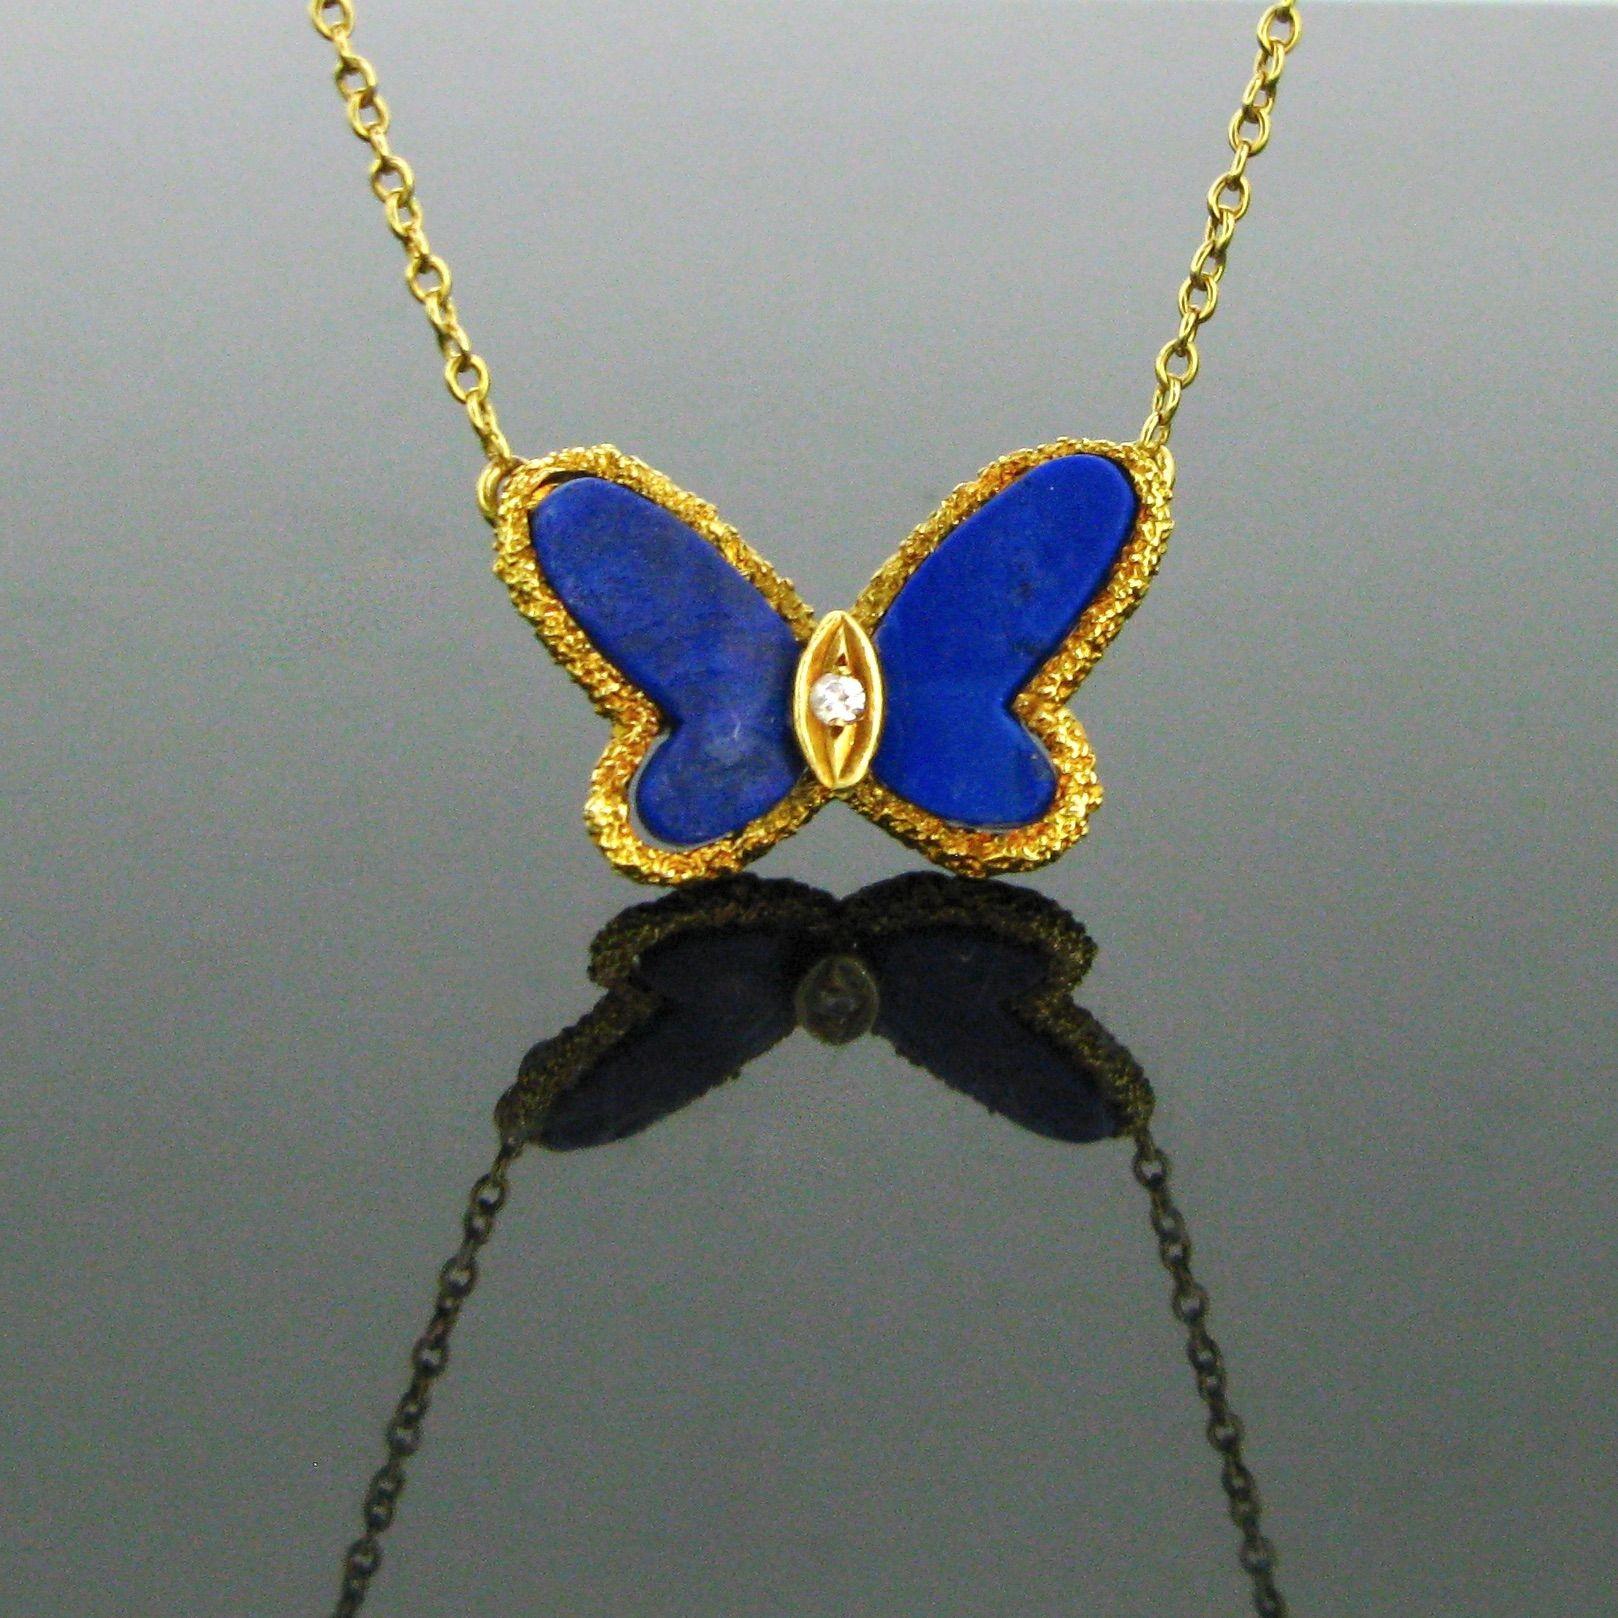 Weight: 6,8gr

Metal: 18kt yellow gold

Condition: Very Good

Stones: Lapis Lazuli
1 Diamond (0.05ct approx.)

Signature: VCA, nº 4040L900

Hallmarks: French, eagle’s head

Comments: This iconic necklace is from the Butterfly collection by Van Cleef